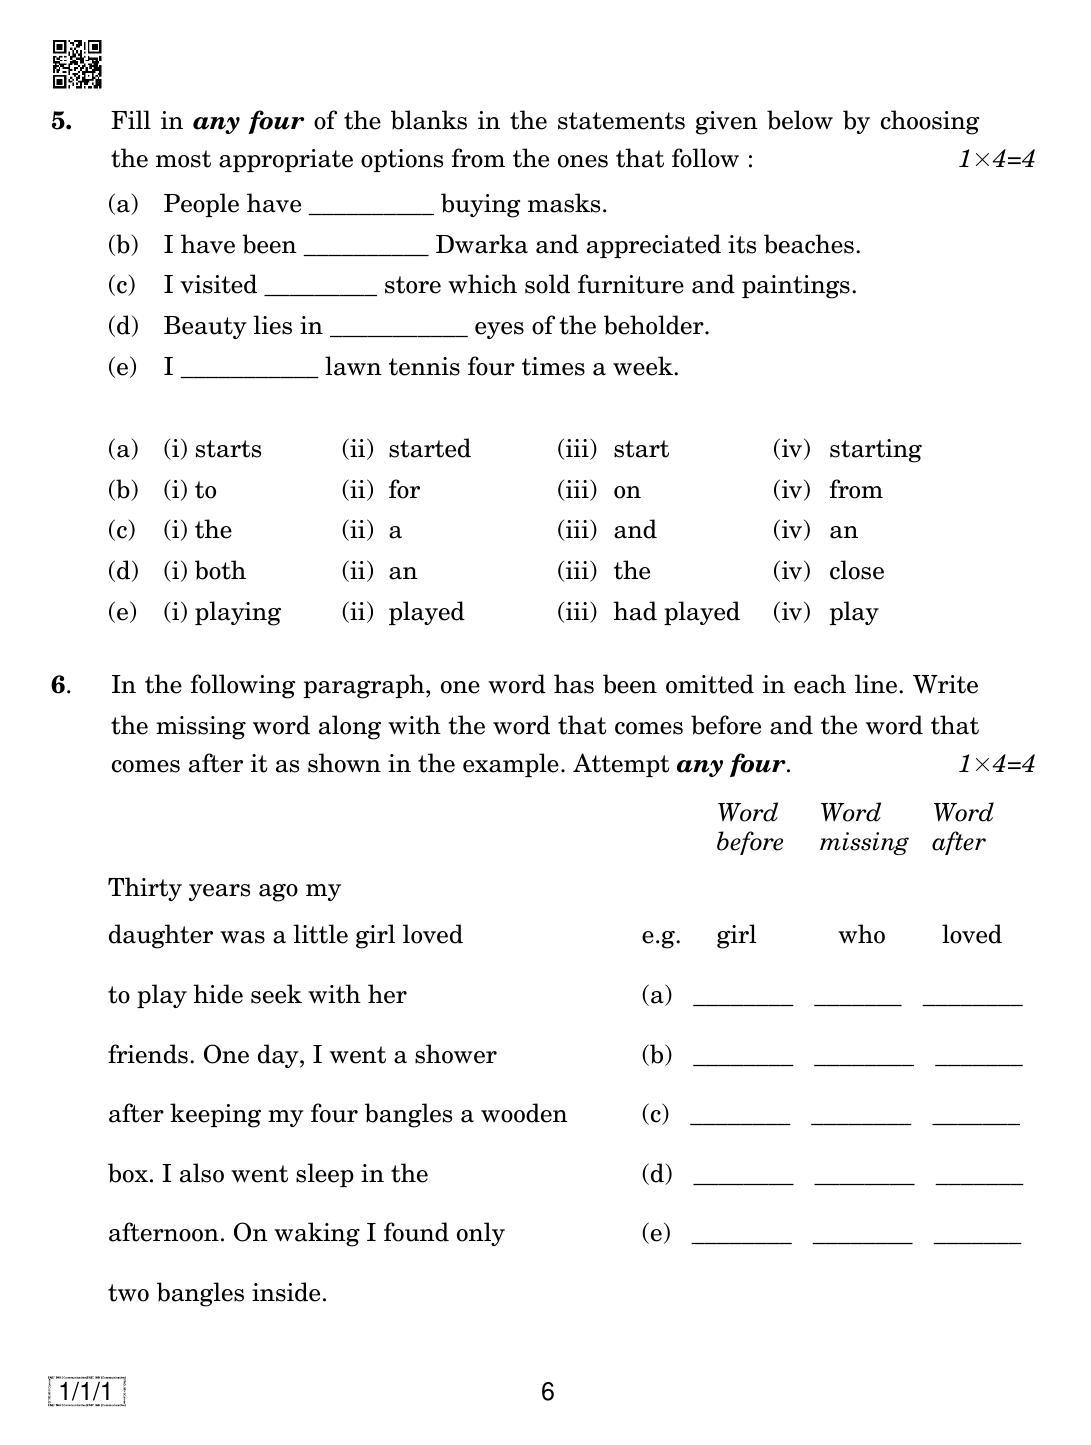 CBSE Class 10 1-1-1 ENGLISH COMM. 2019 Compartment Question Paper - Page 6